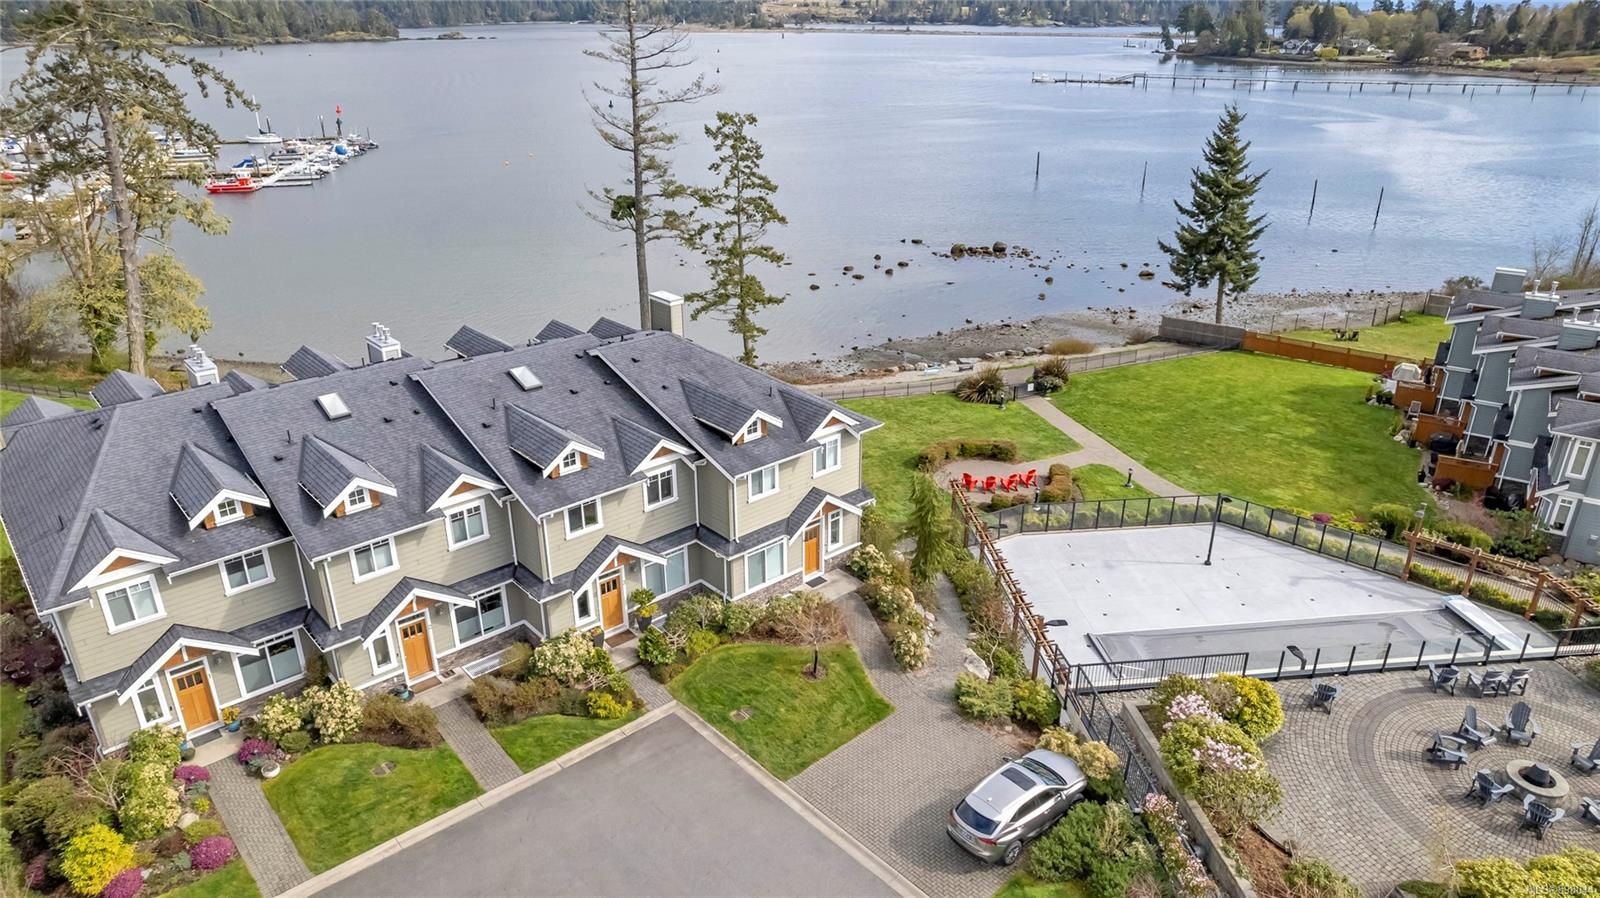 Open House. Open House on Saturday, July 16, 2022 11:00AM - 1:00PM
Stunning Oceanfront Sooke Townhouse in Heron View with 4 bedrooms and 4 bathrooms and all the amenities you can imagine. Open house this Saturday July 16th 11am to 1pm. $1,199,000.00 and P